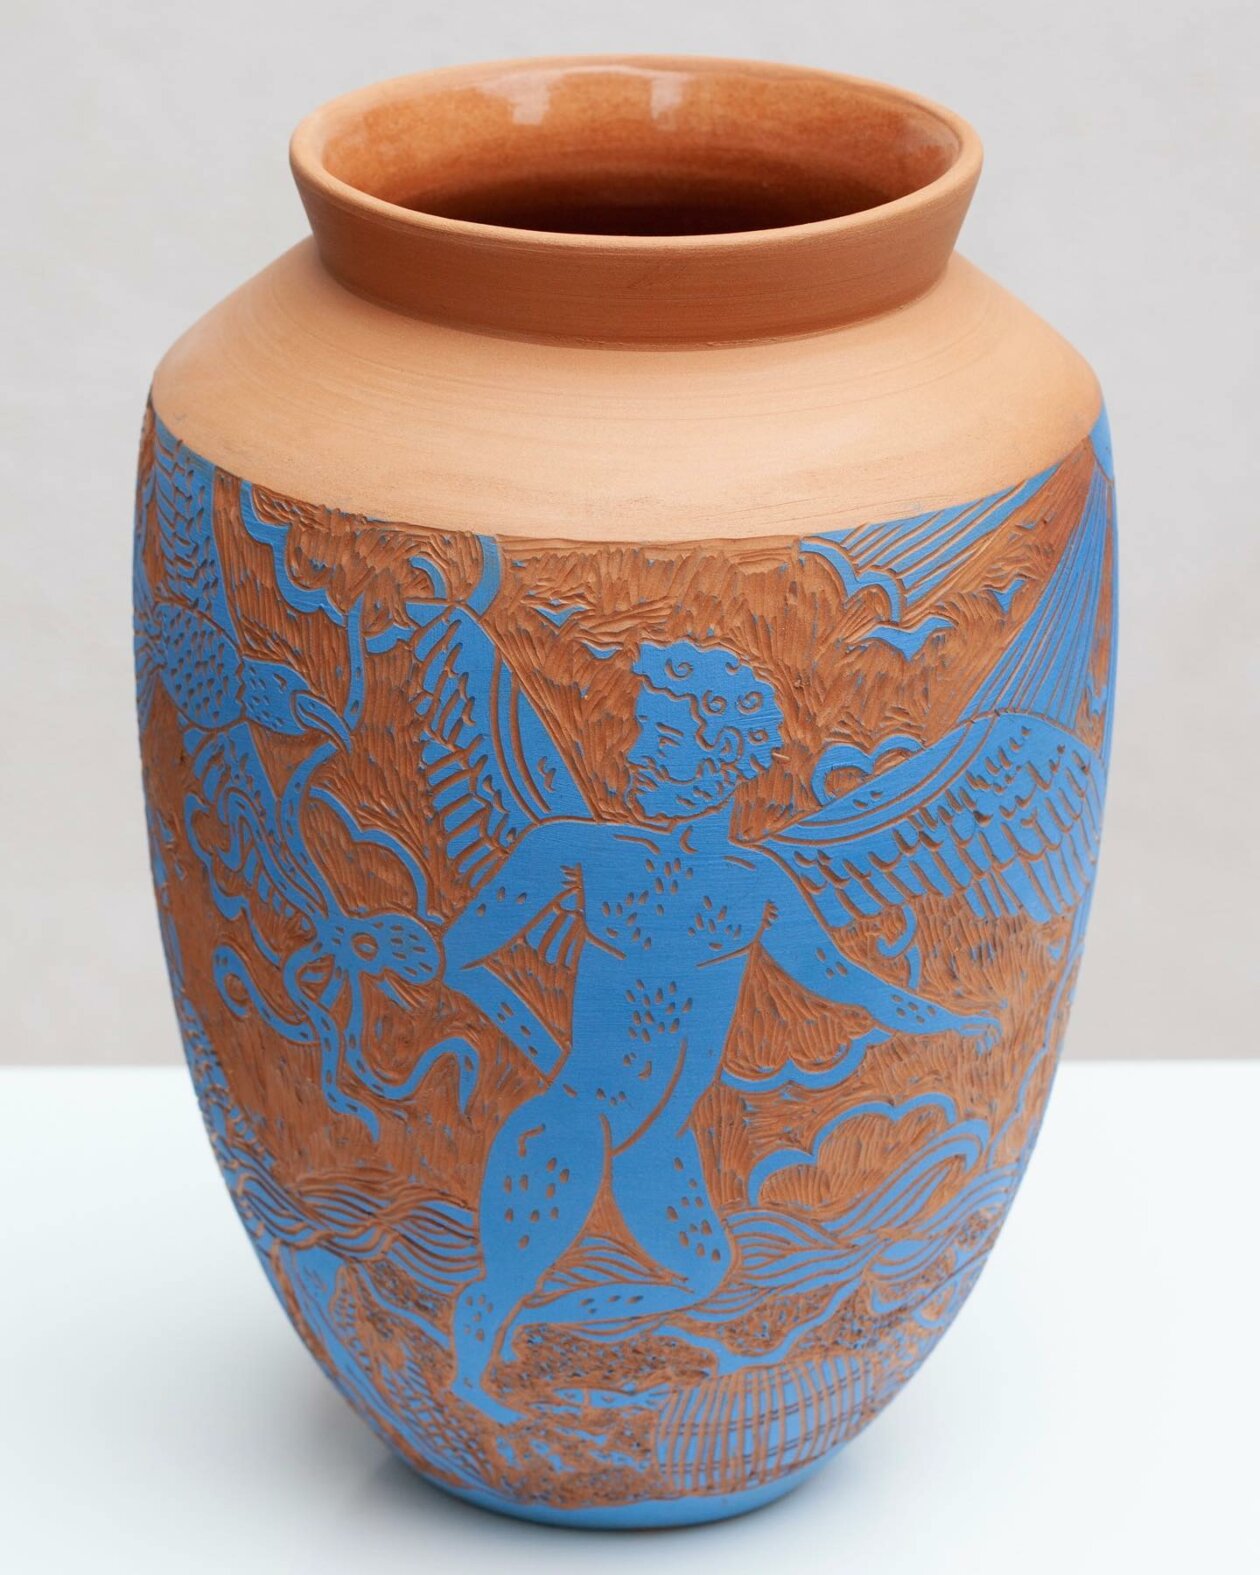 Illustred Ceramic Vessels And Tiles By Clara Holt 6